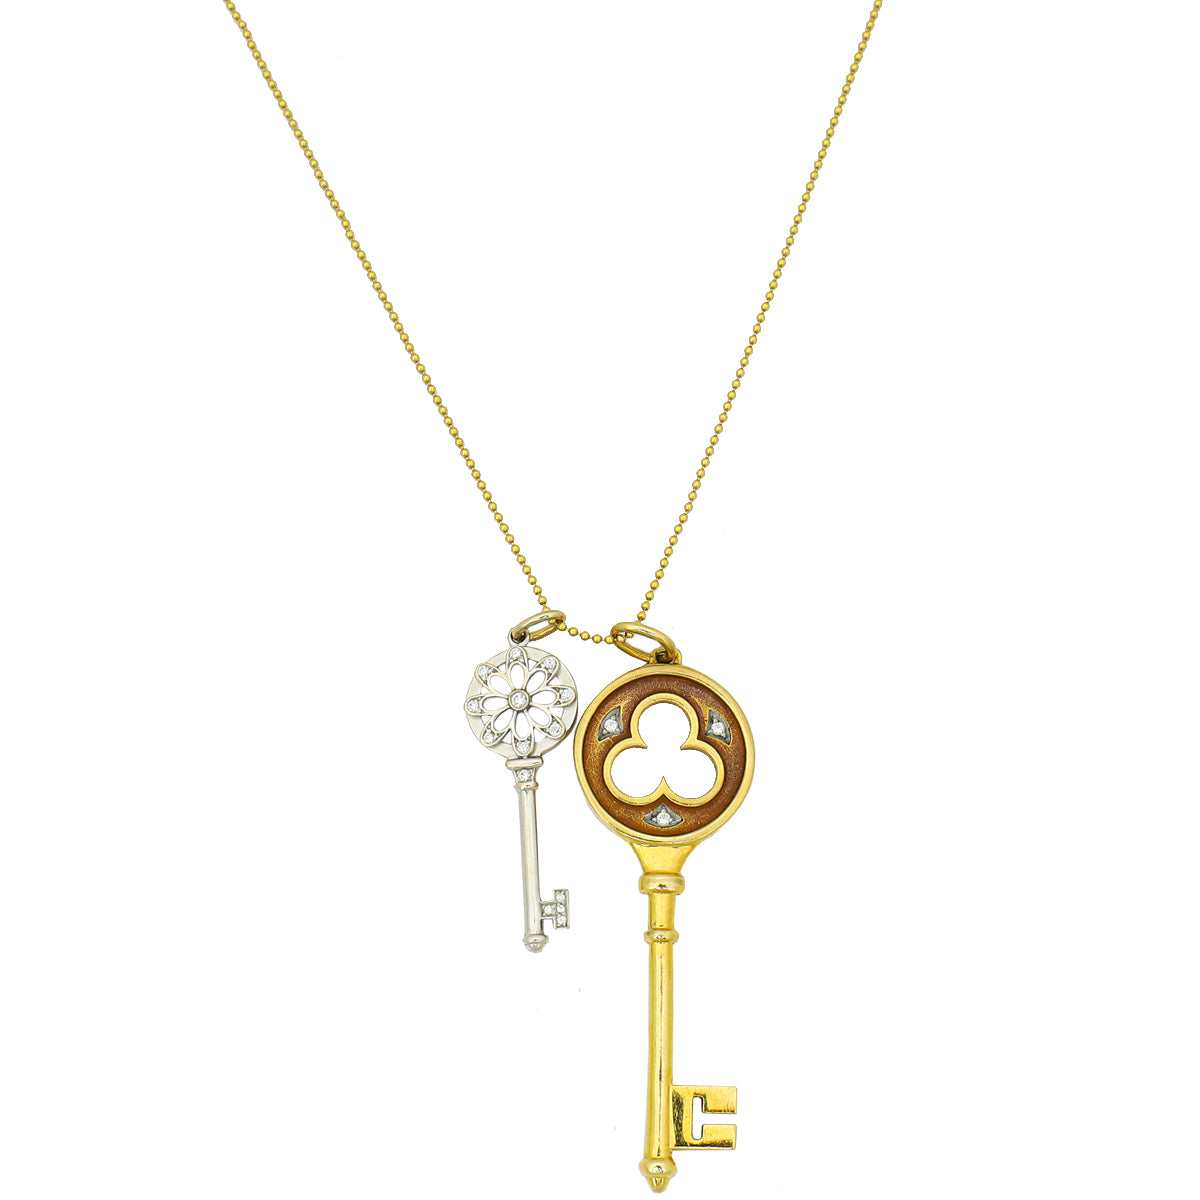 Tiffany & Co Yellow Gold Clover Key & Floral Key Pendant W/ Beaded Chain Necklace